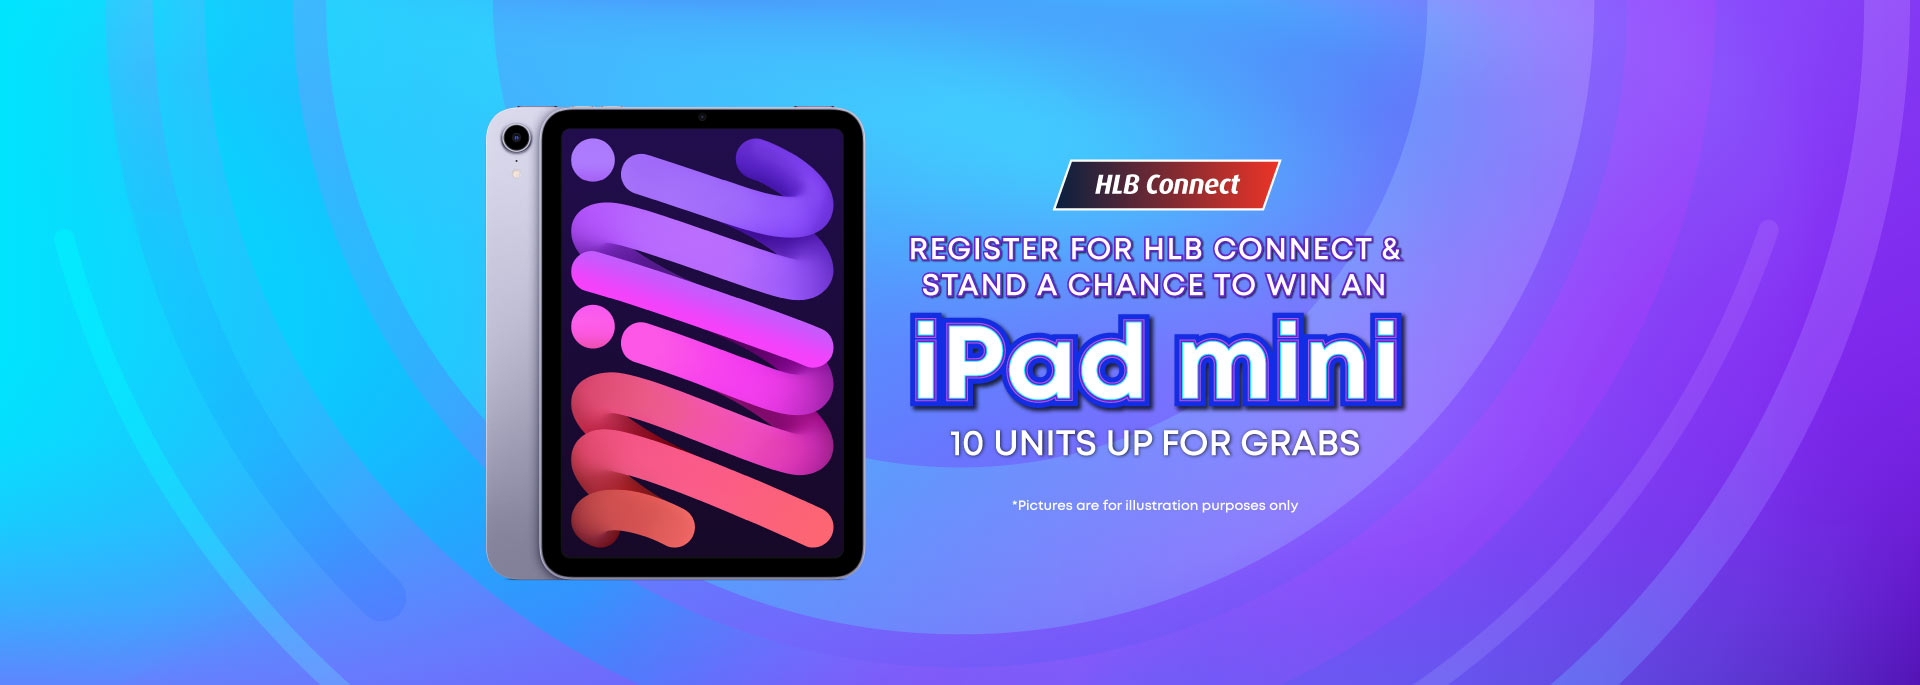 Register for HLB Connect & stand a chance to win an iPad mini